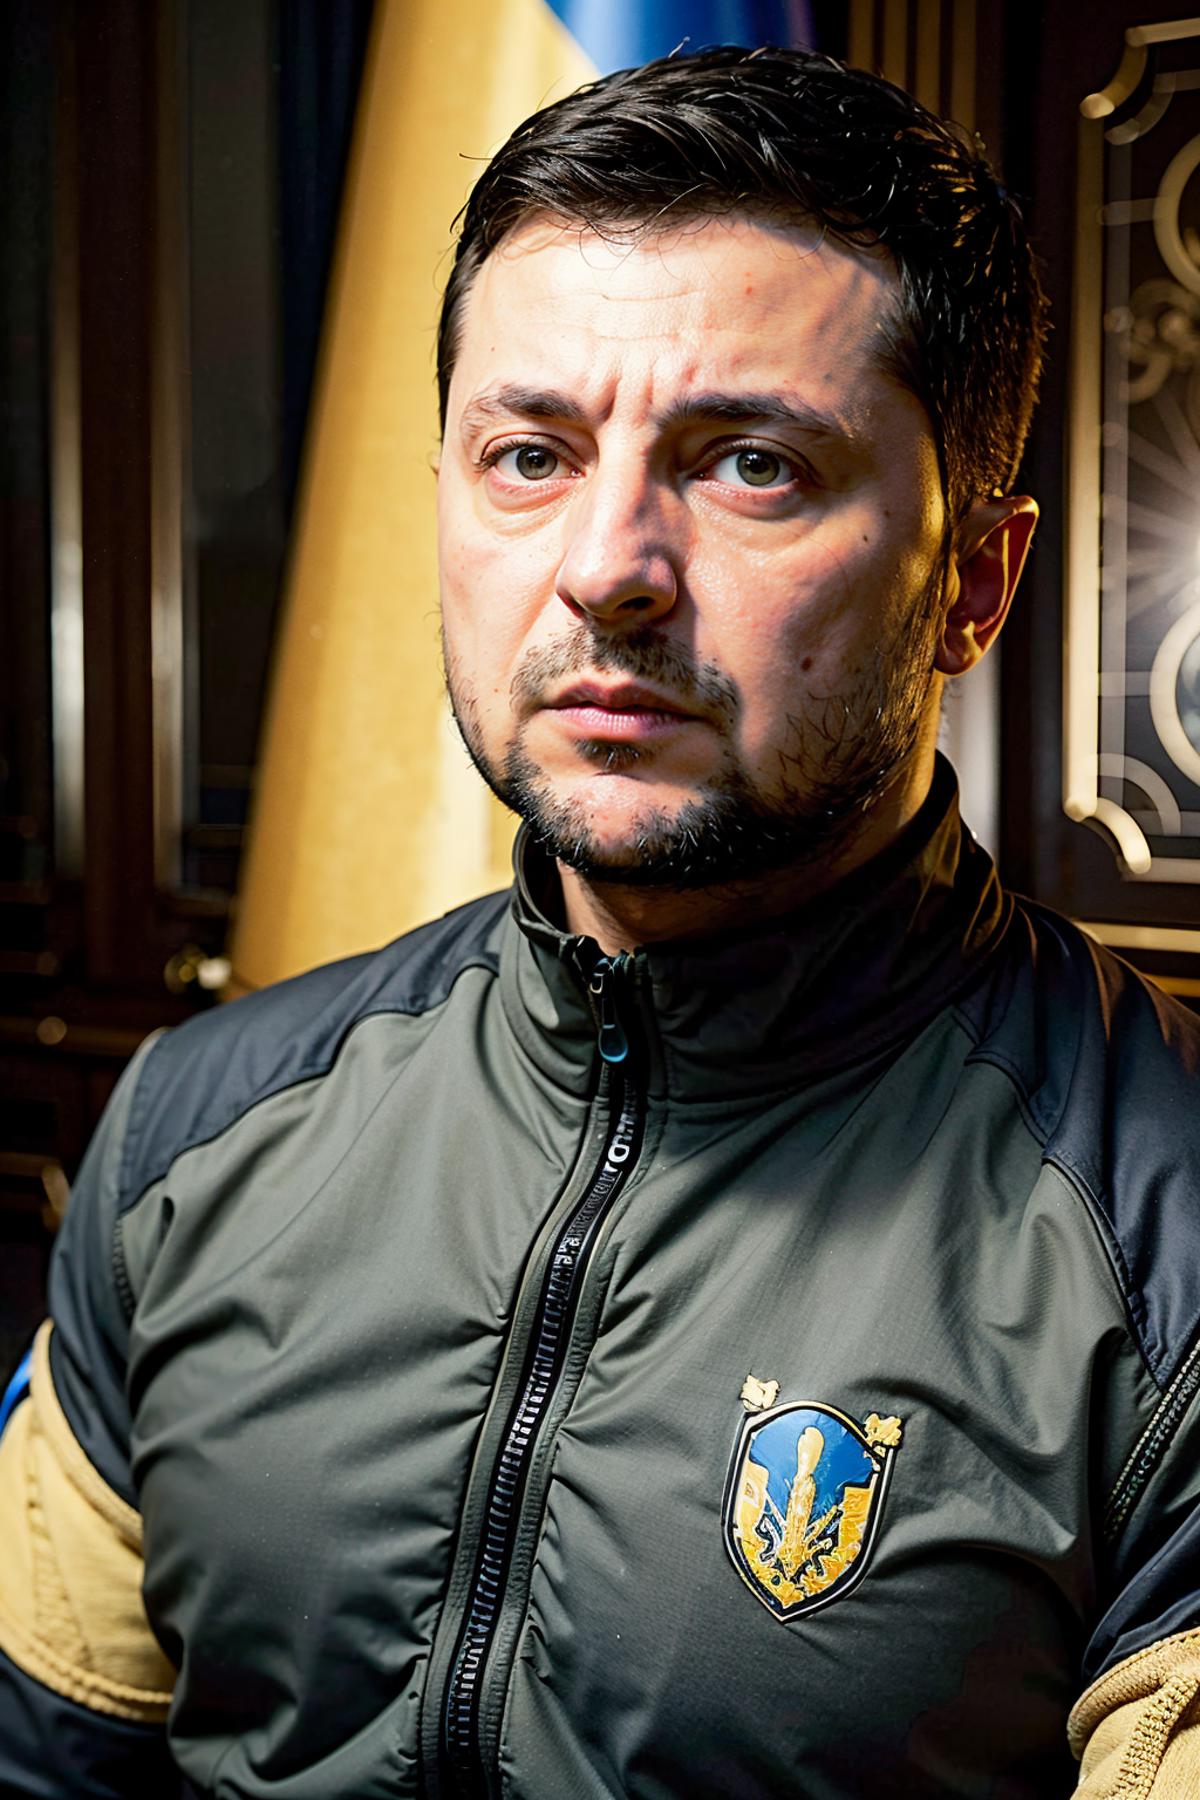 Man wearing a black and grey jacket with a blue logo.